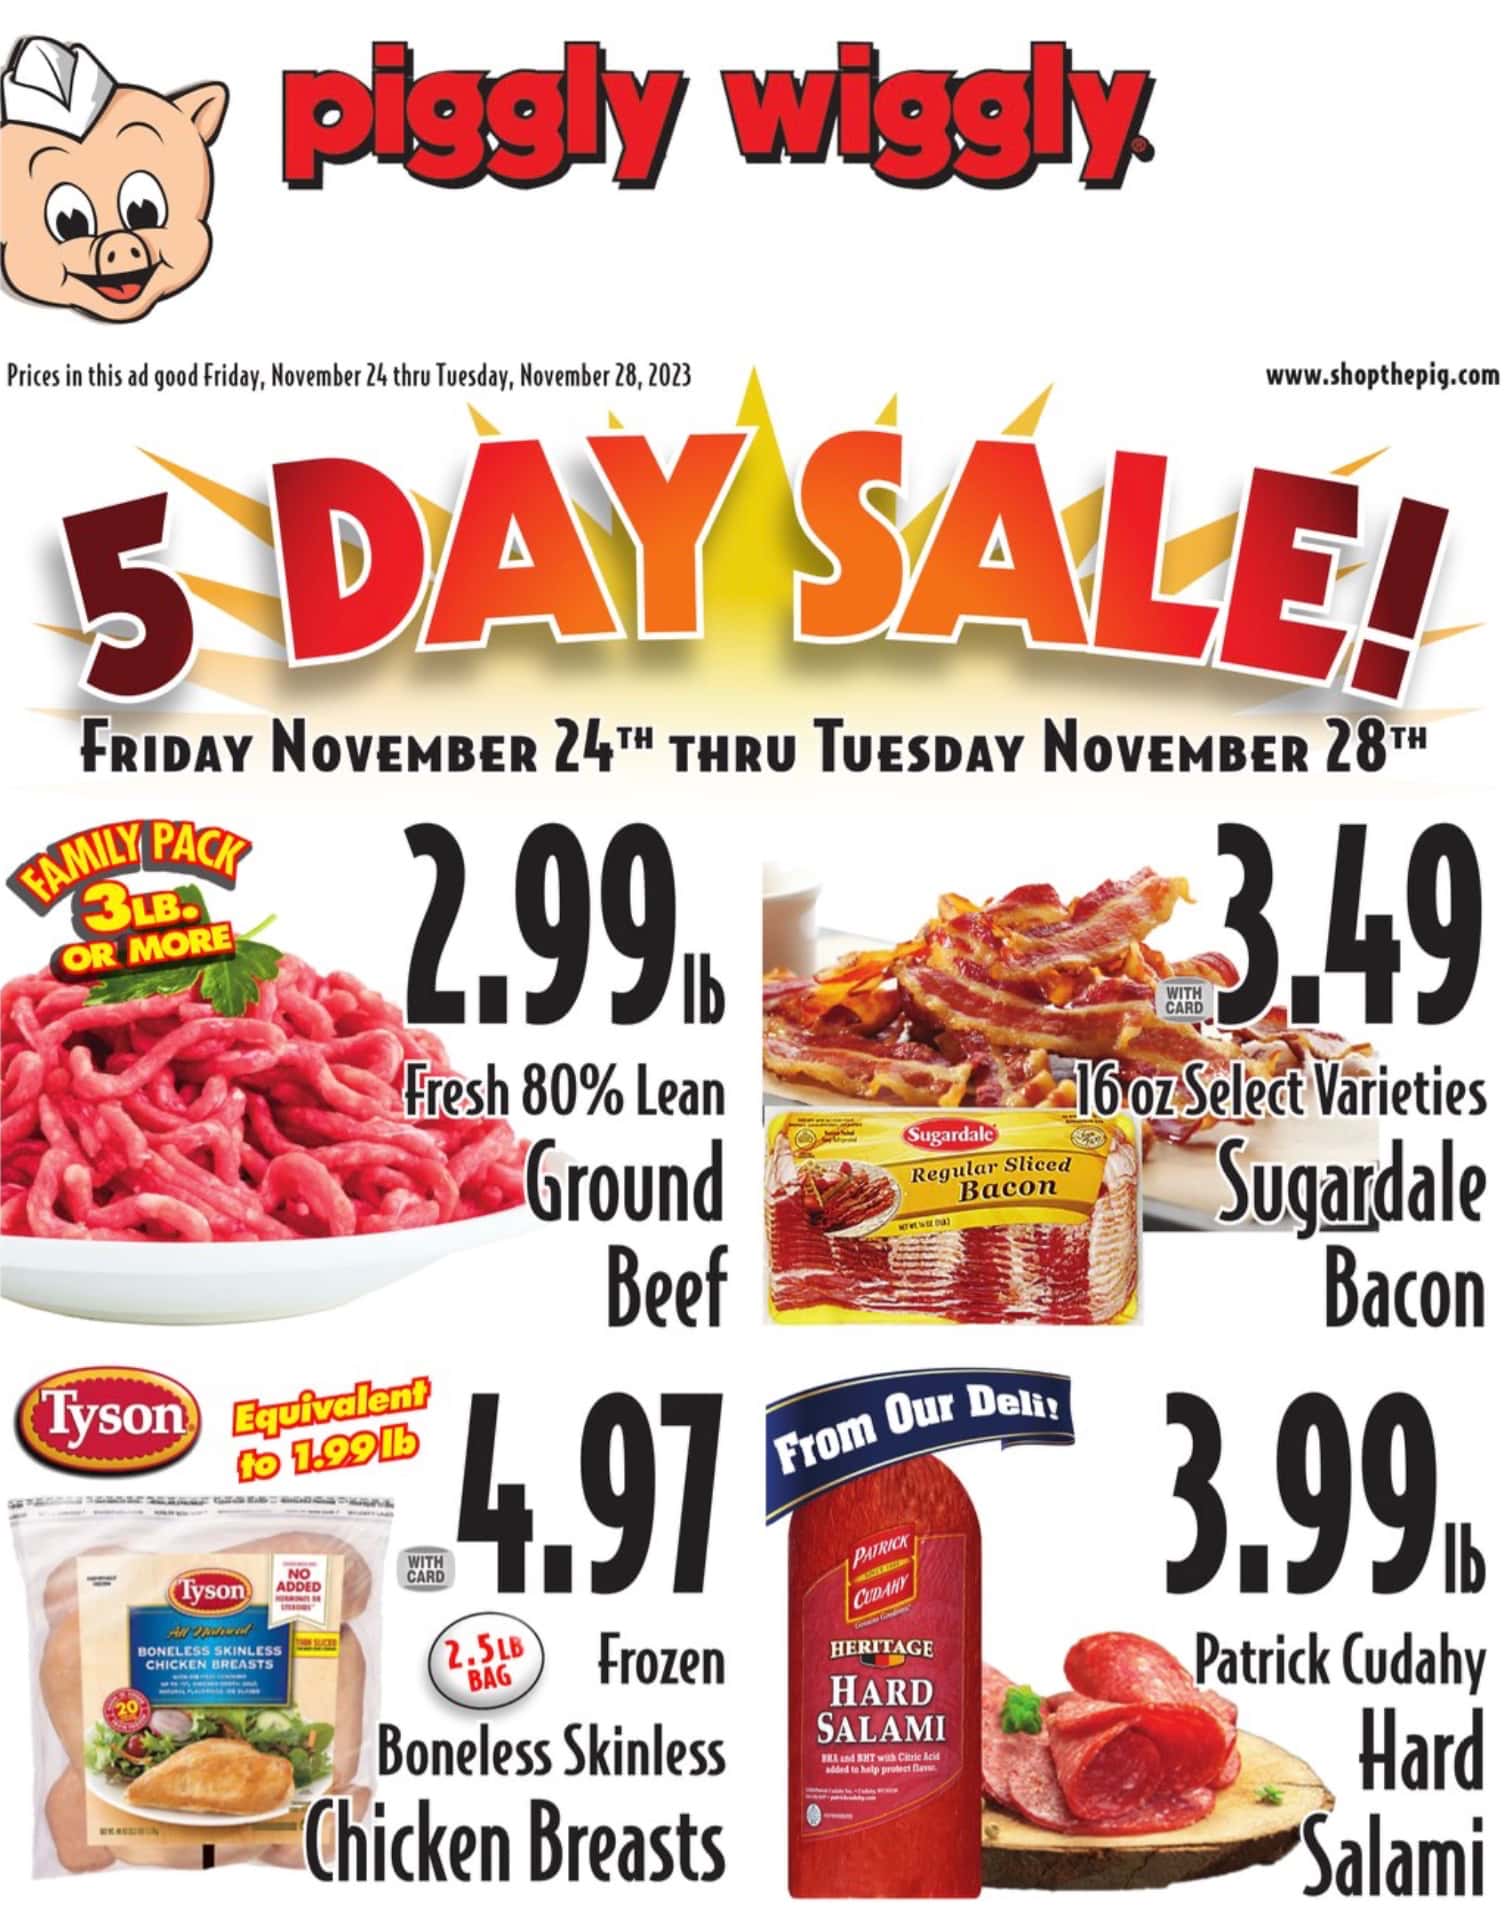 Piggly Wiggly Black Friday July 2024 Weekly Sales, Deals, Discounts and Digital Coupons.